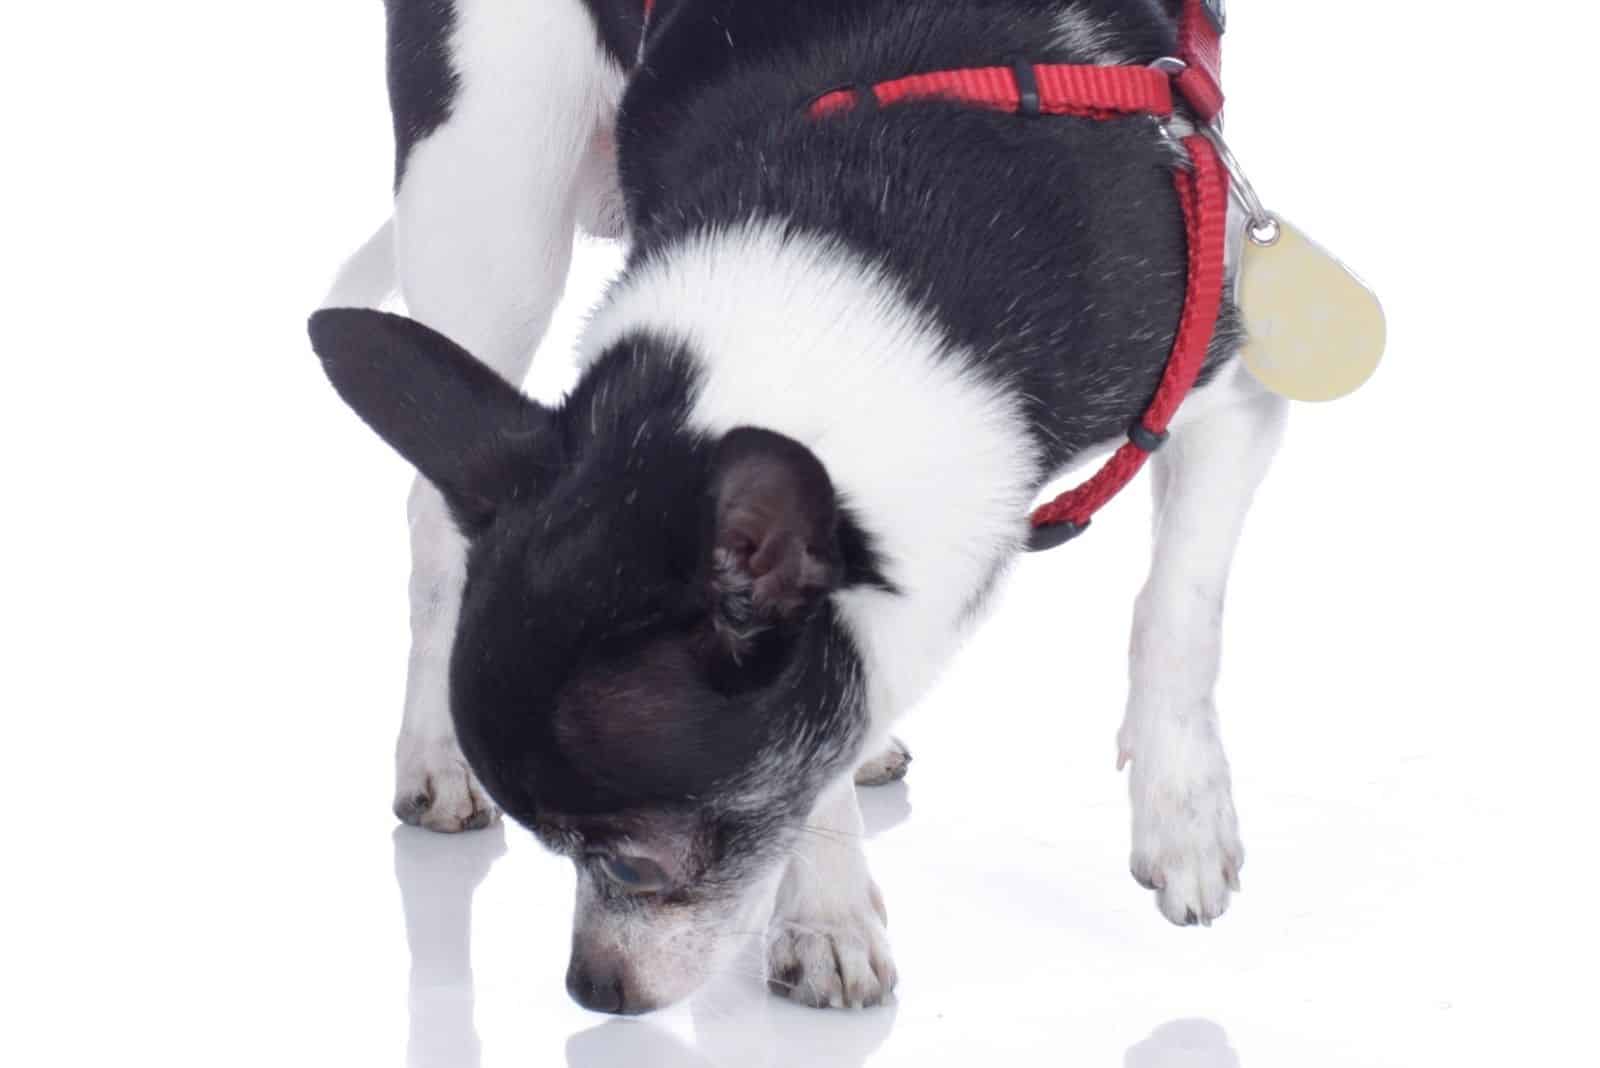 chihuahua dog sniffing on the floor with red leash